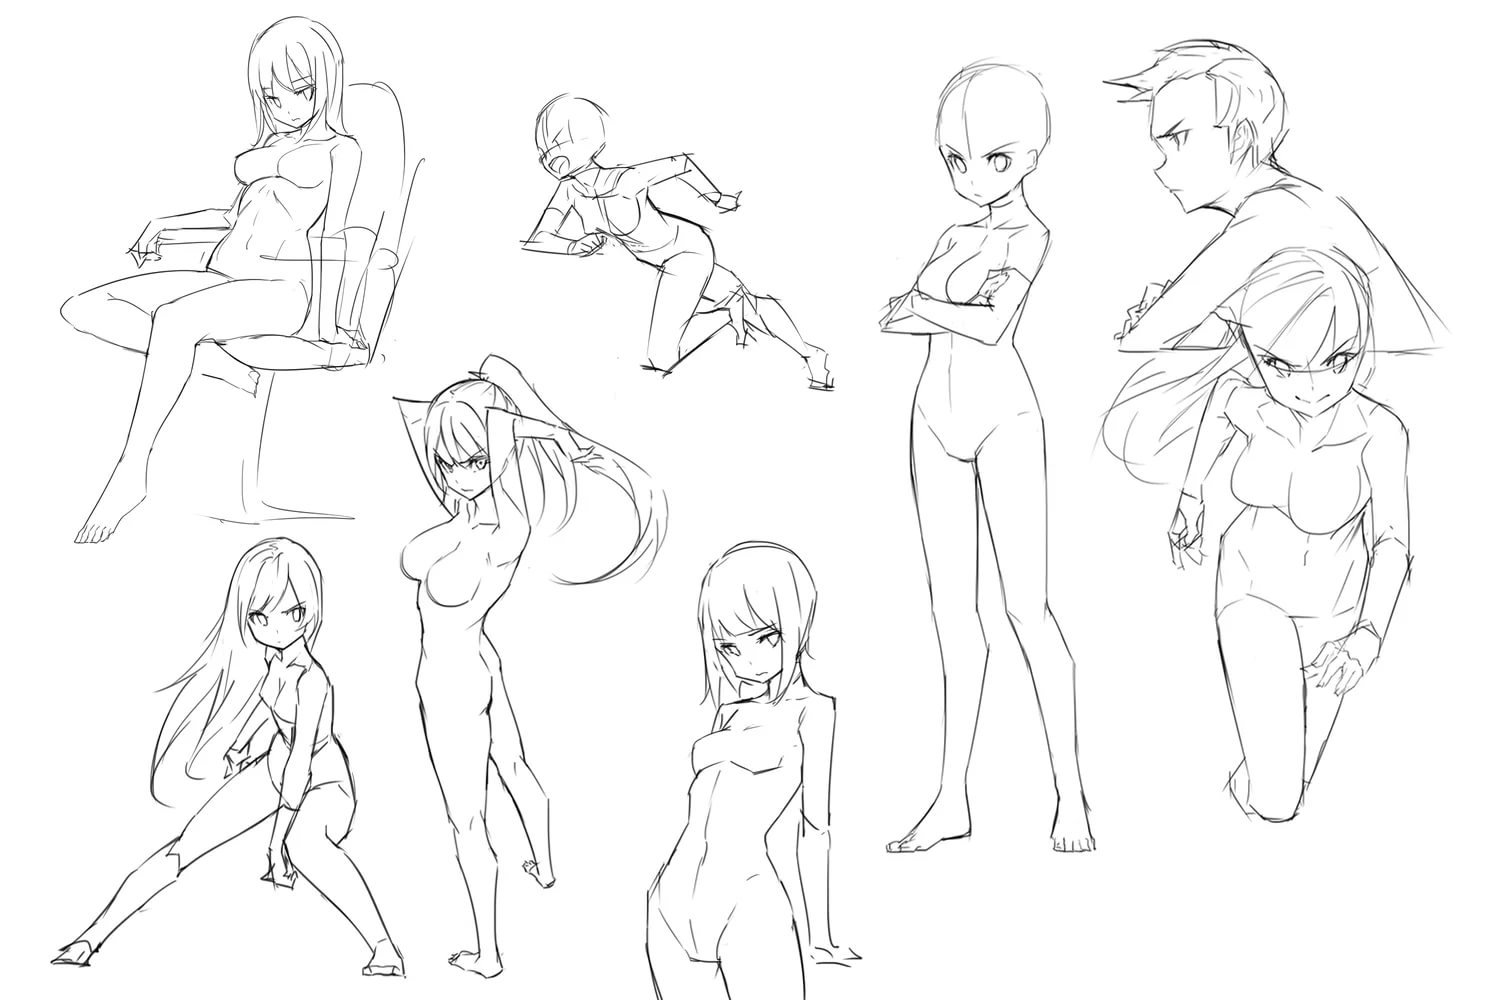 Anime reference poses